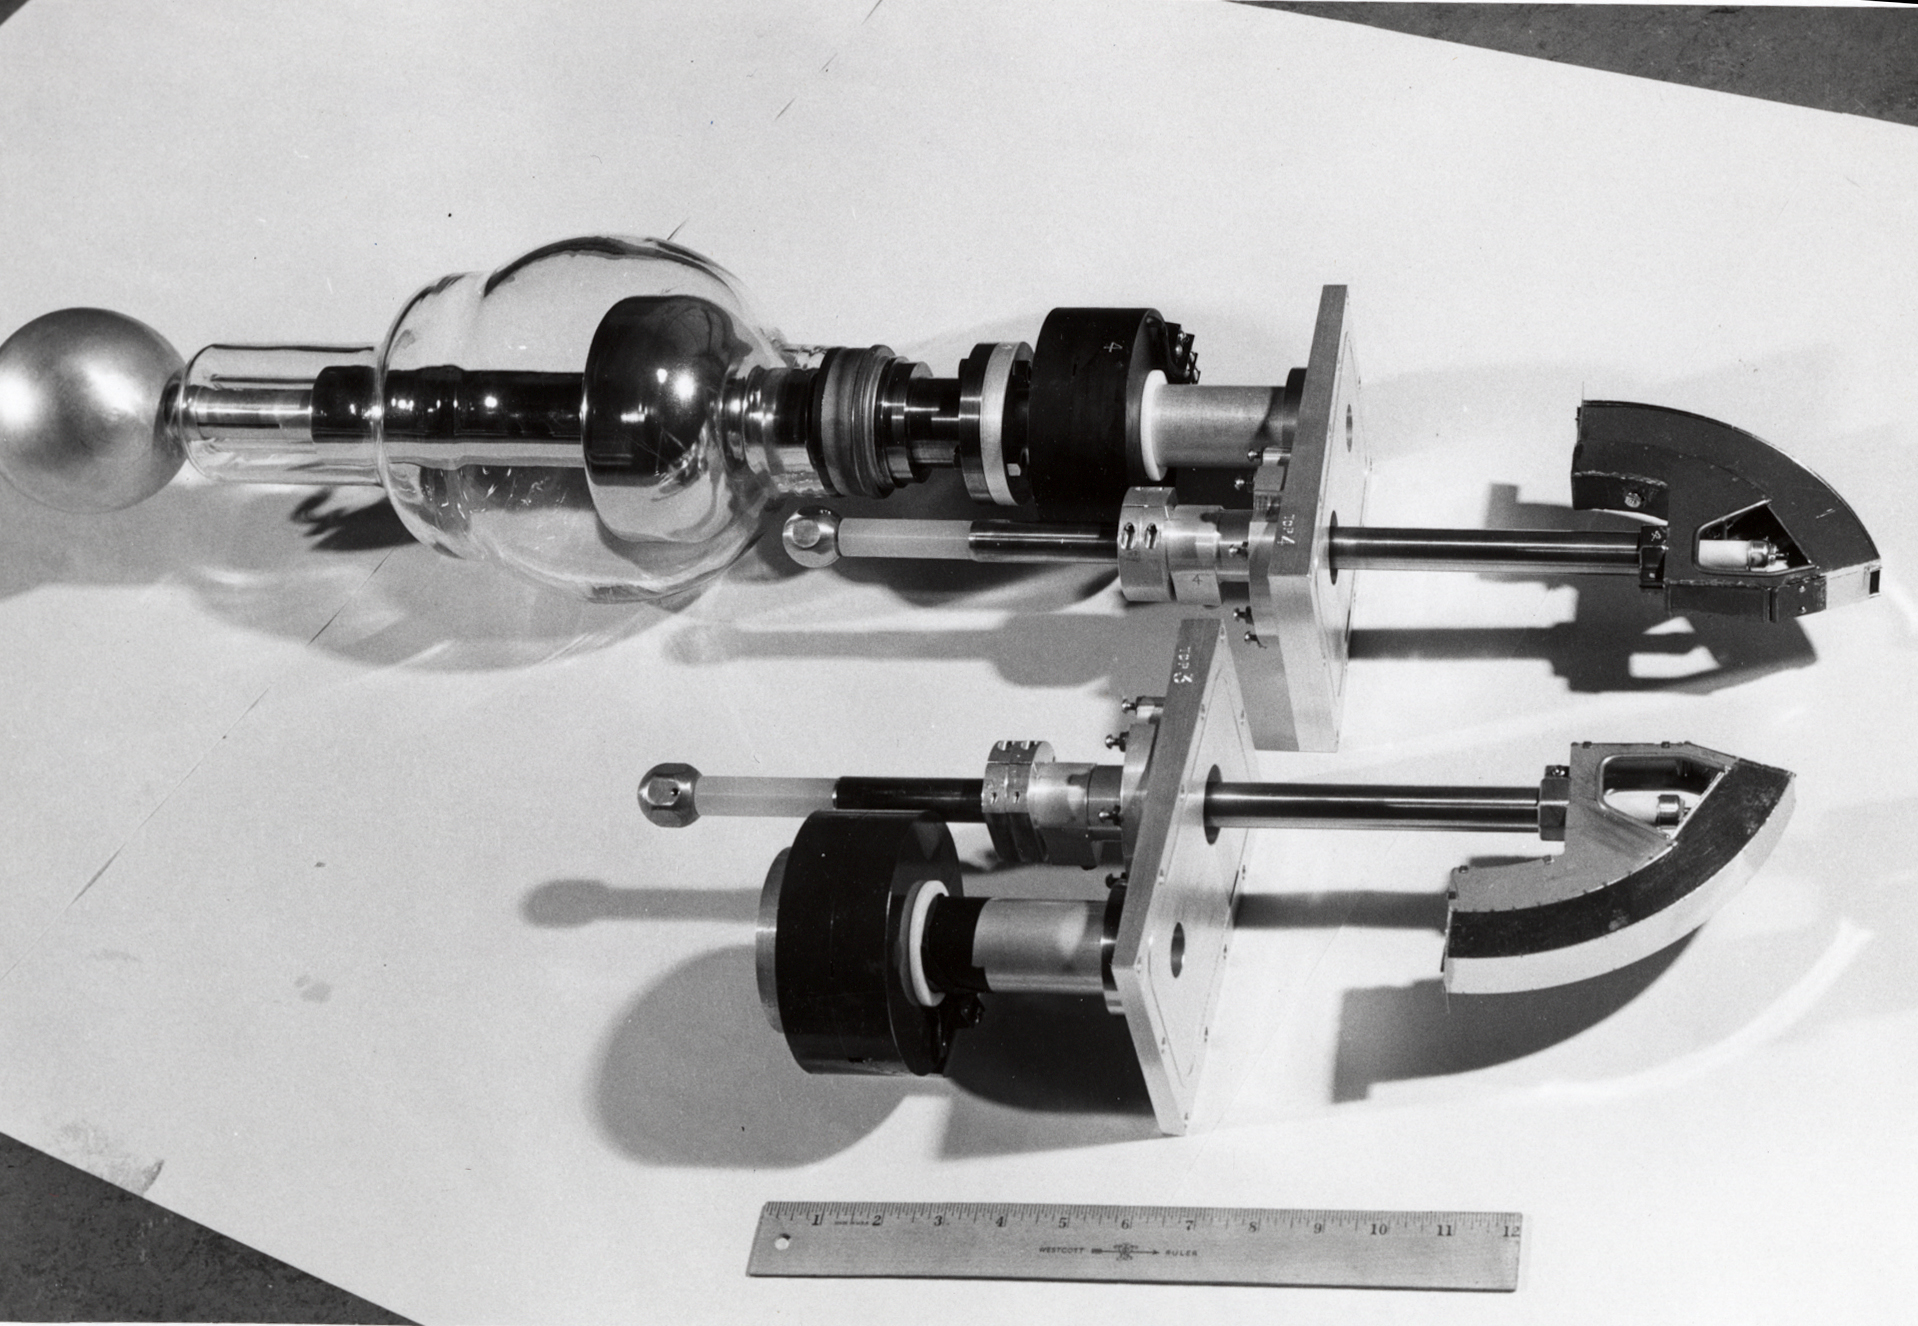   Injector inflector, part of the 50 MeV machine at Midwestern Universities Research Association (MURA). Photo: University of Wisconsin Madison Archives  